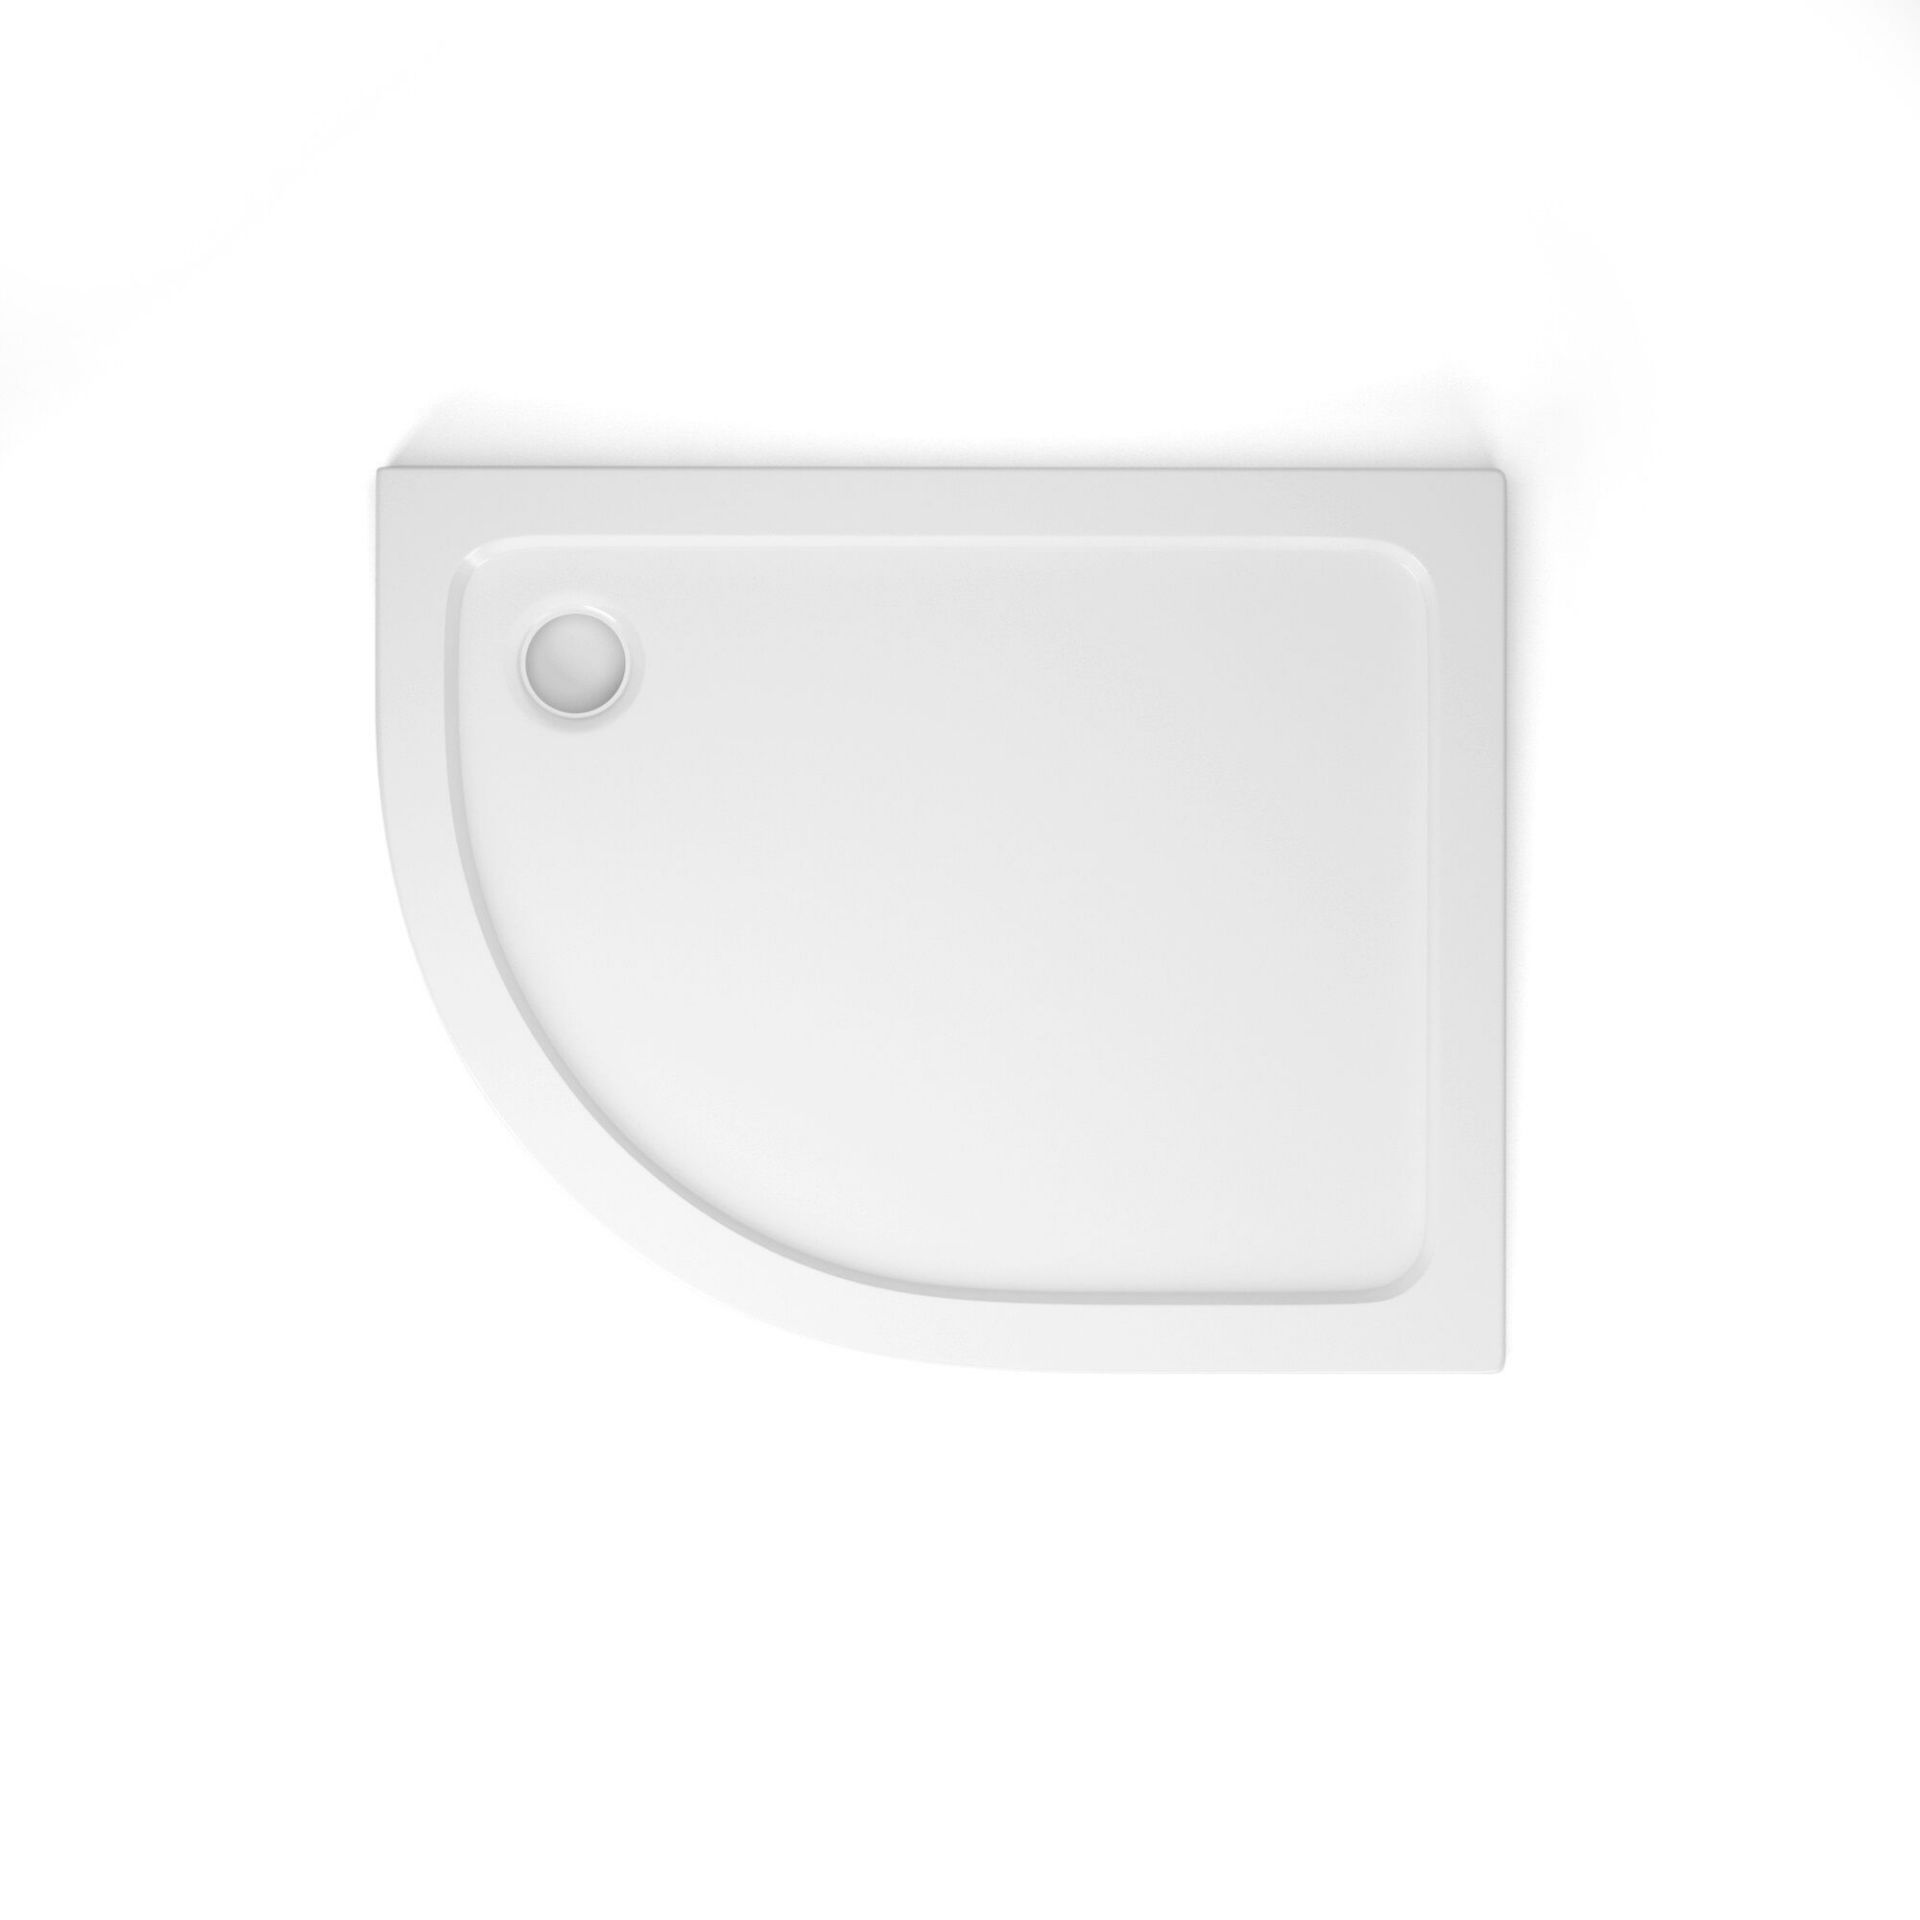 (MW196) 1000x800mm Offset Quadrant Ultra Slim Stone Shower Tray - Left. Constructed from acrylic